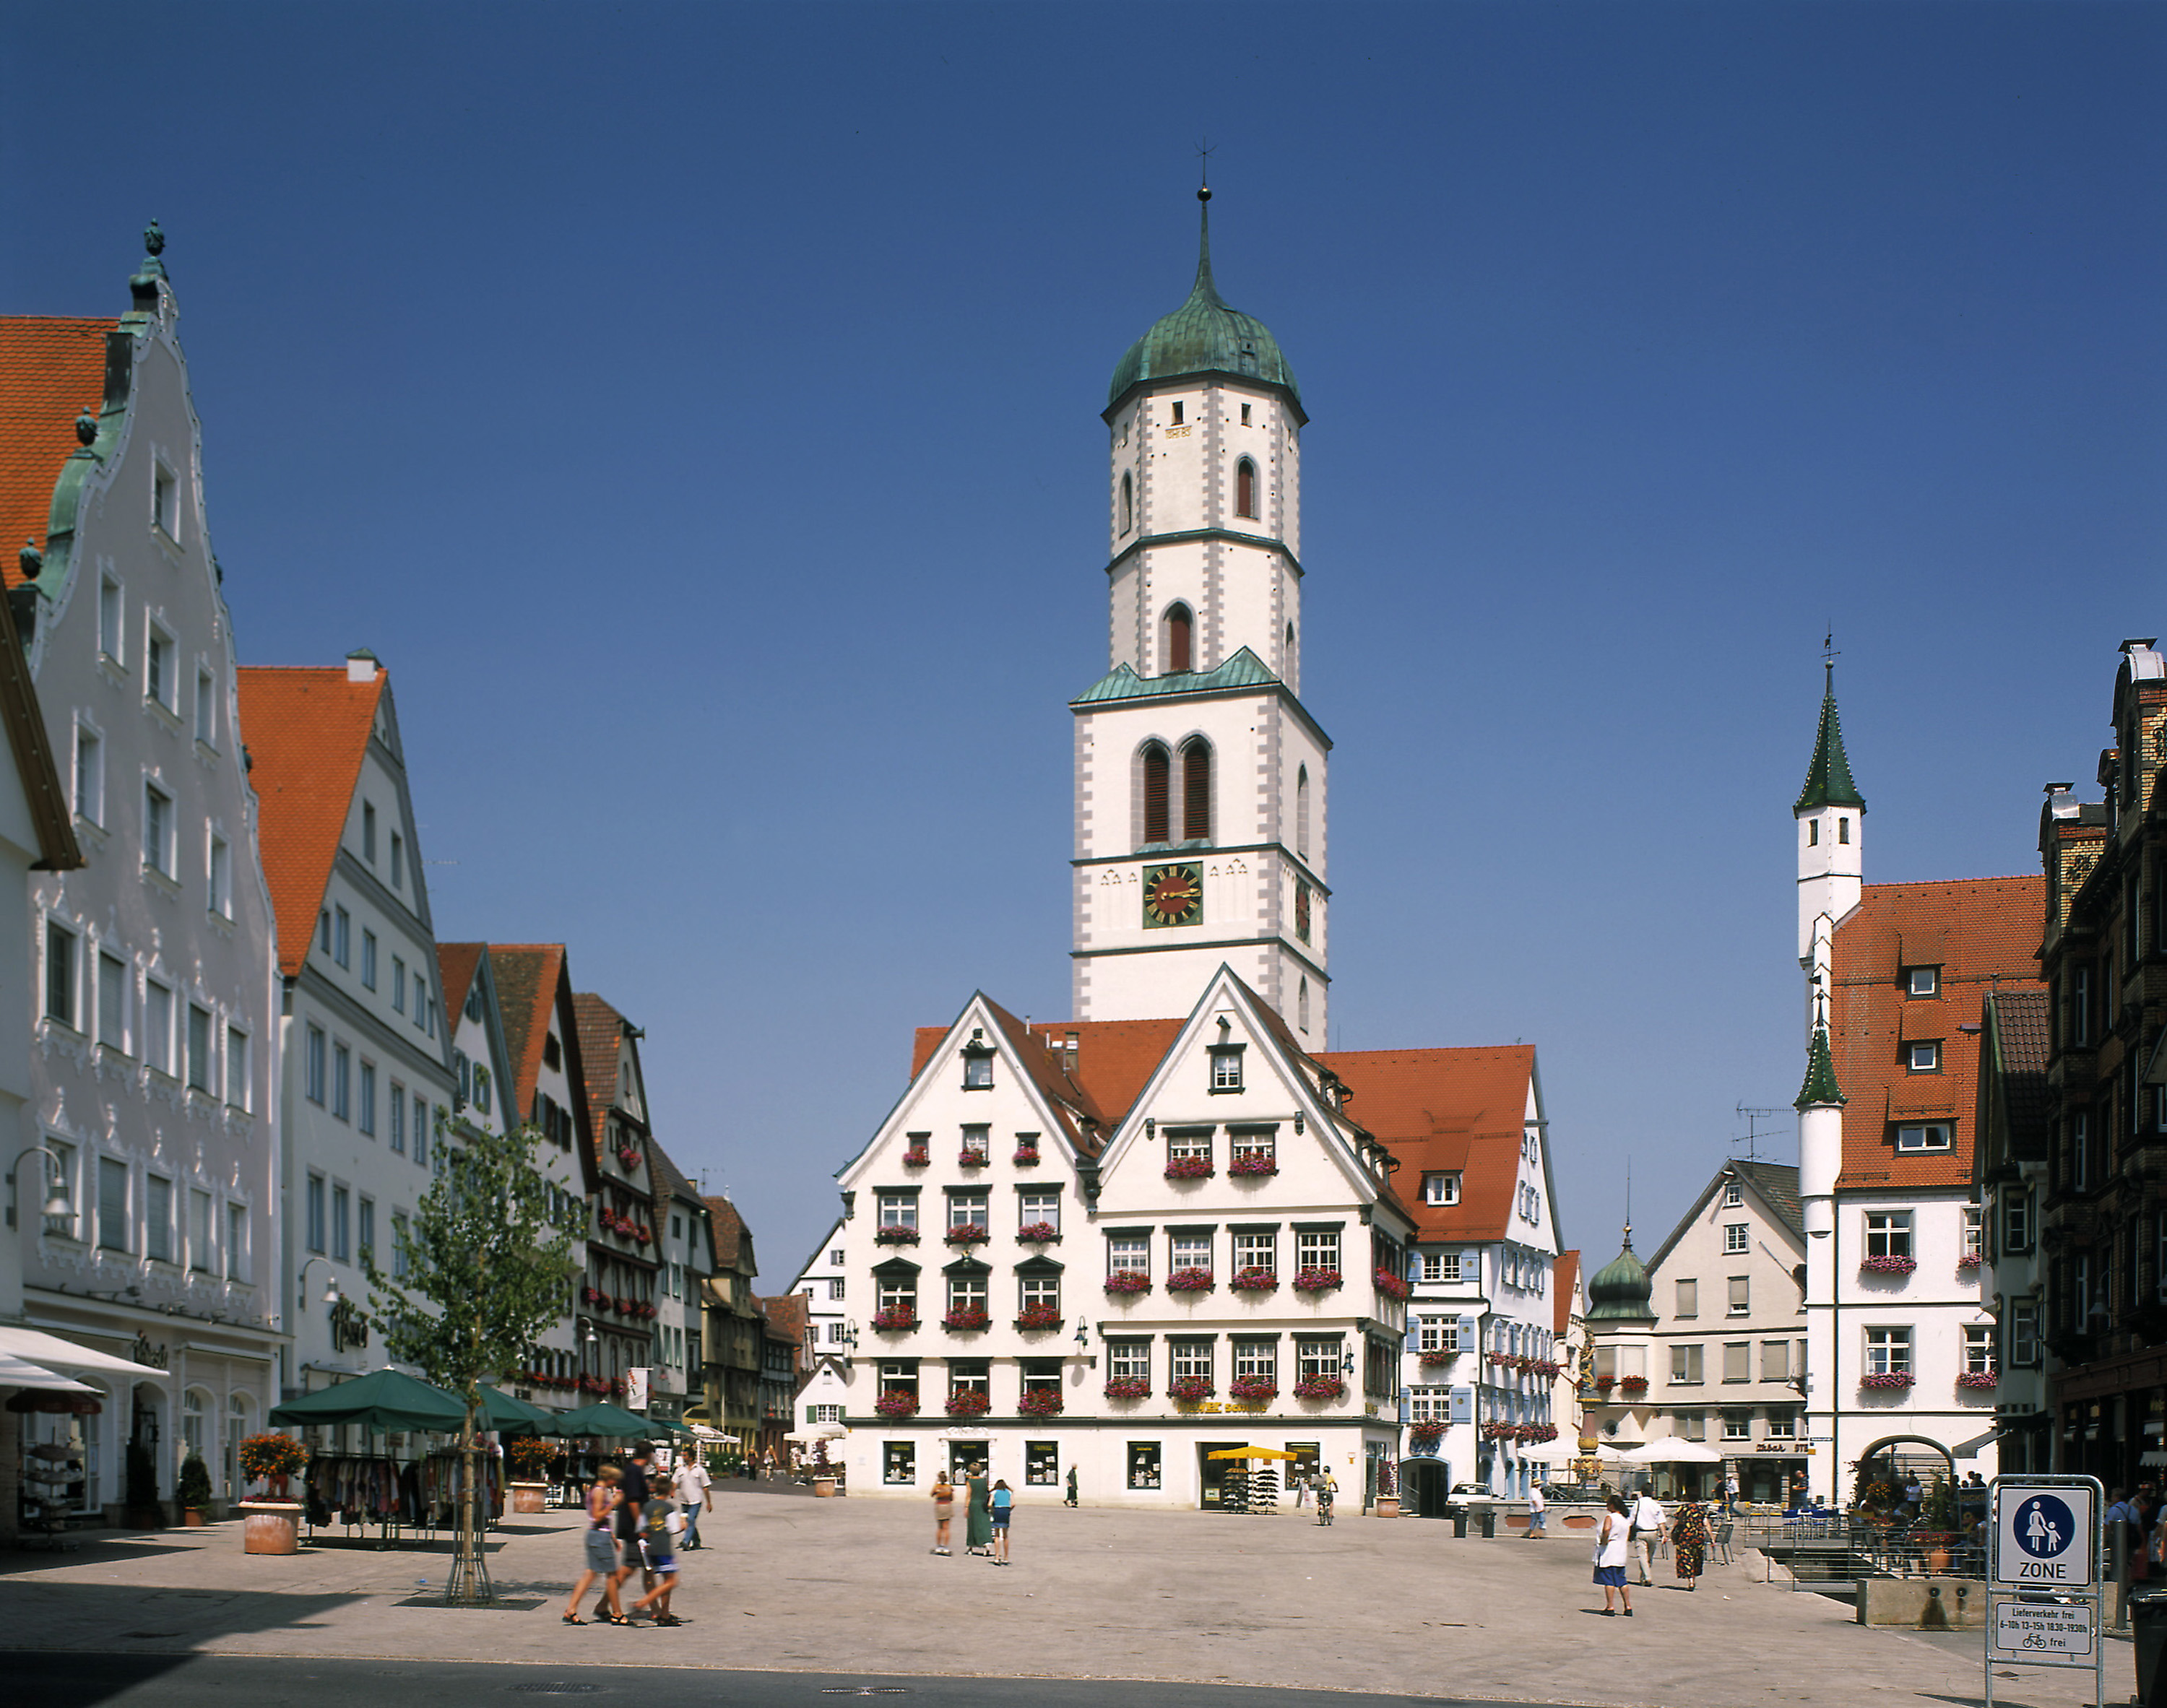 St Martin’s church on the market square in Biberach, Germany